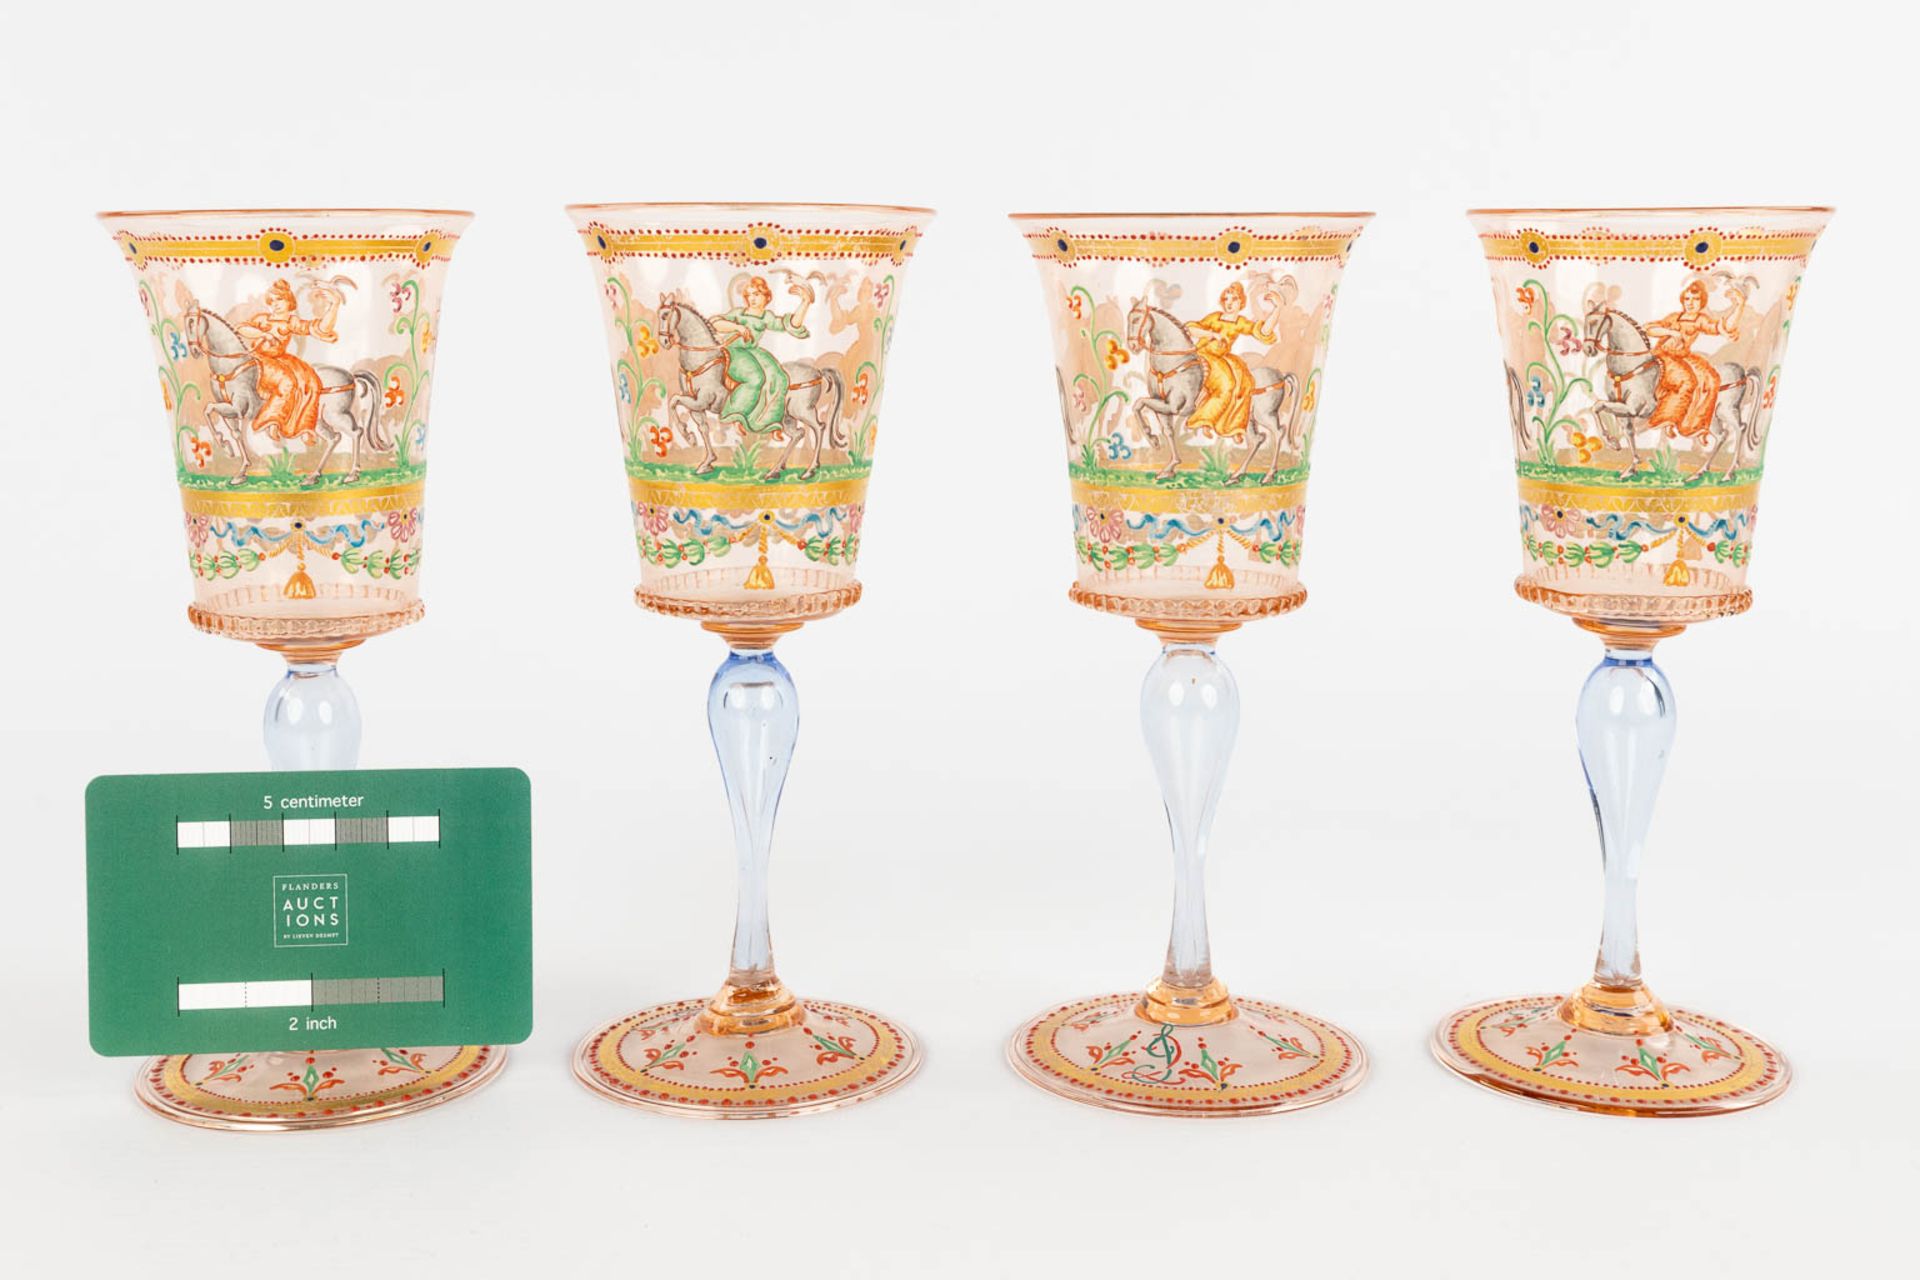 A set of 4 hand-painted and antique goblets, Murano, Salviati, 19th C. (H:17 x D:7 cm) - Image 2 of 16